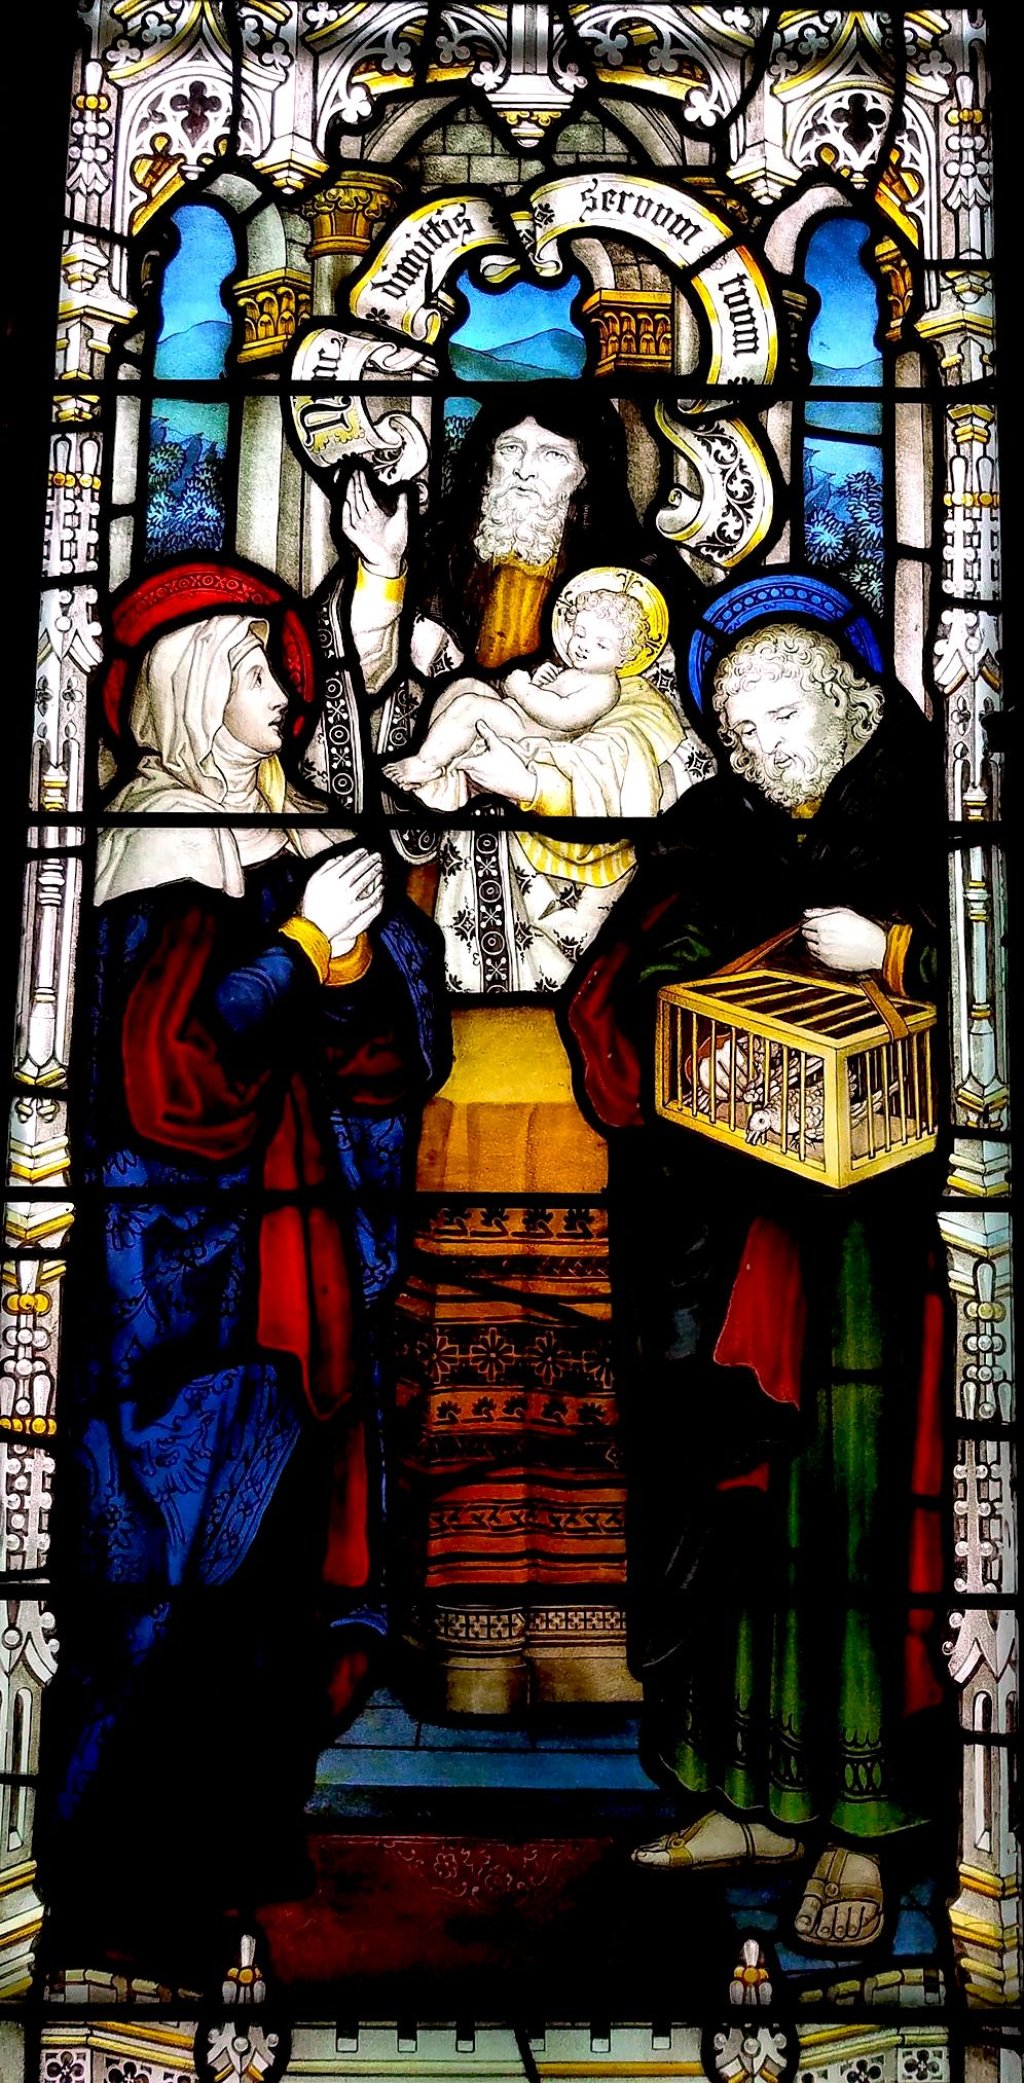 Stained-glass window, Presentation of Jesus in the Temple with Holy Family and Simeon